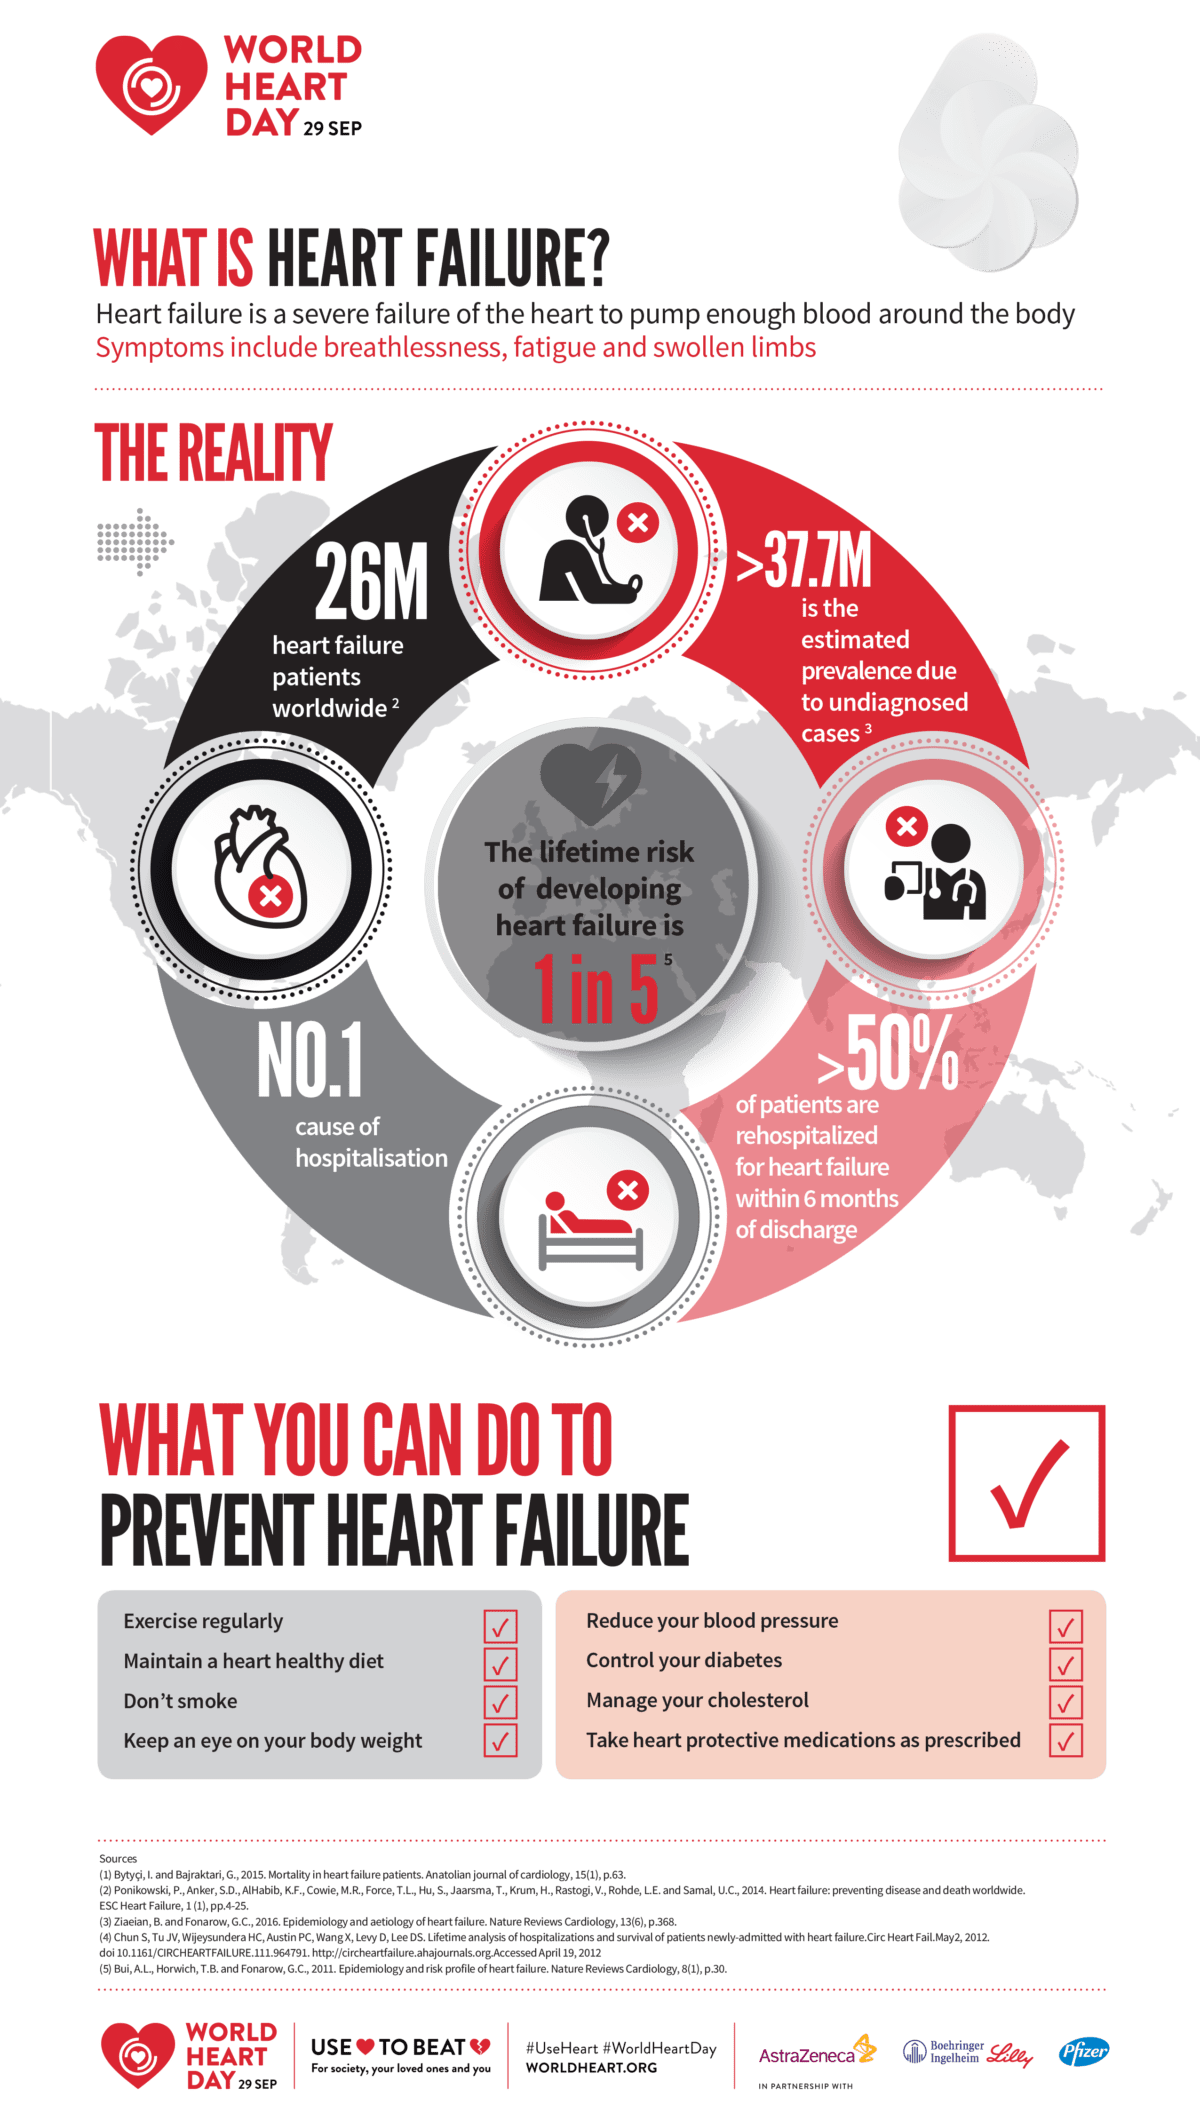 Heart failure facts and how to prevent it